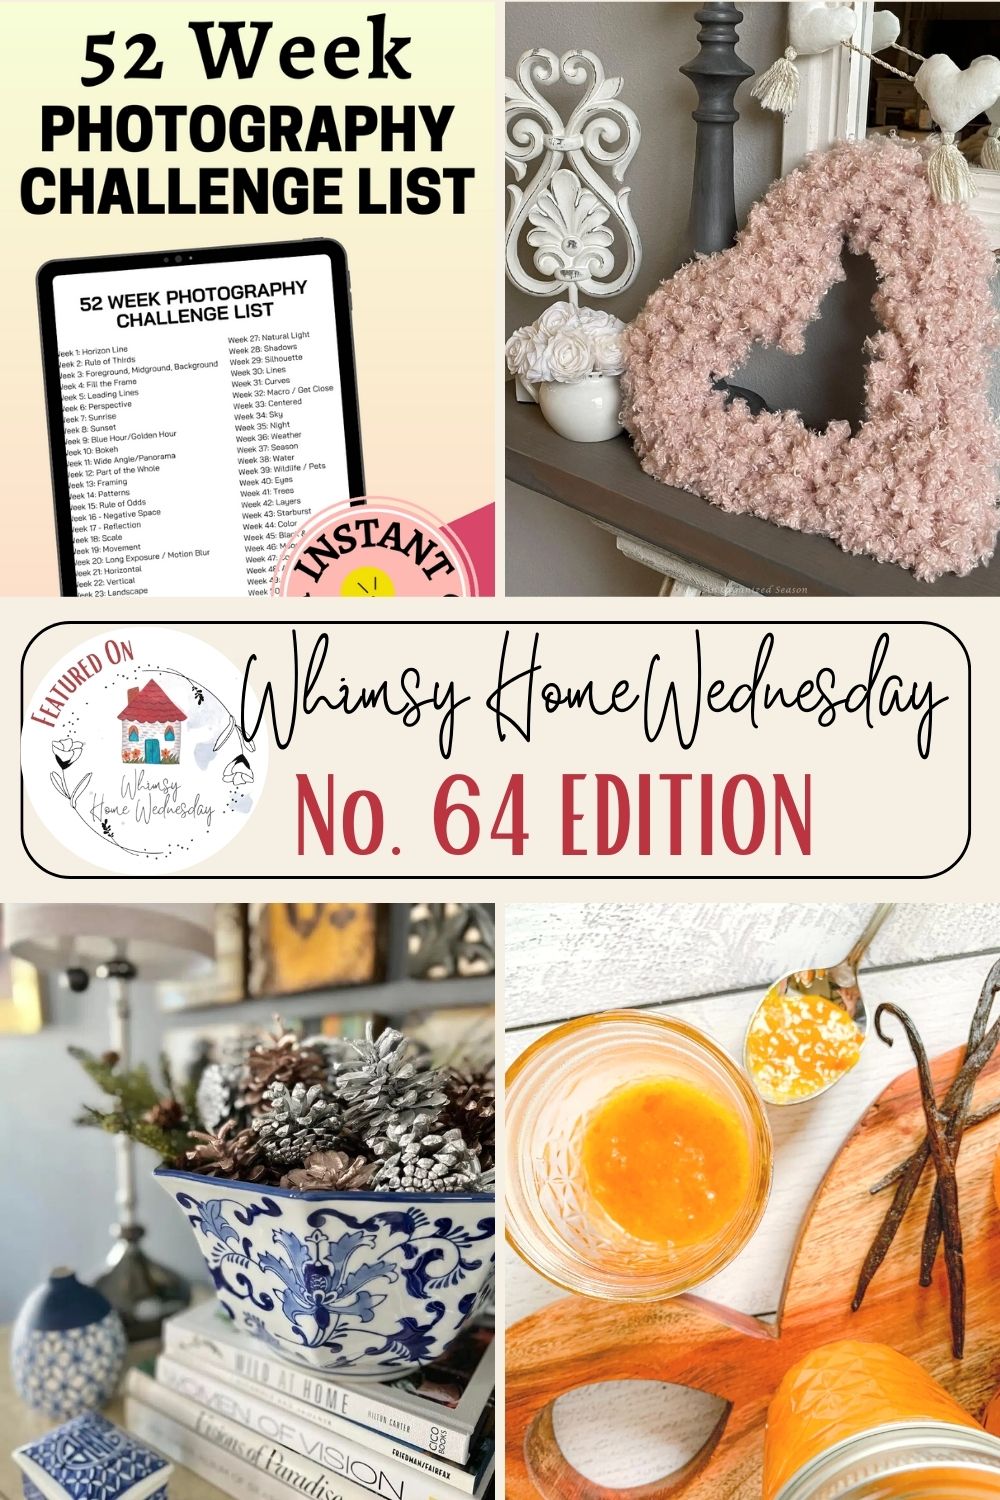 Join us on Whimsy Home Wednesday Blog Link Party No. 64 and see host projects, the features from the previous week and link up your posts!